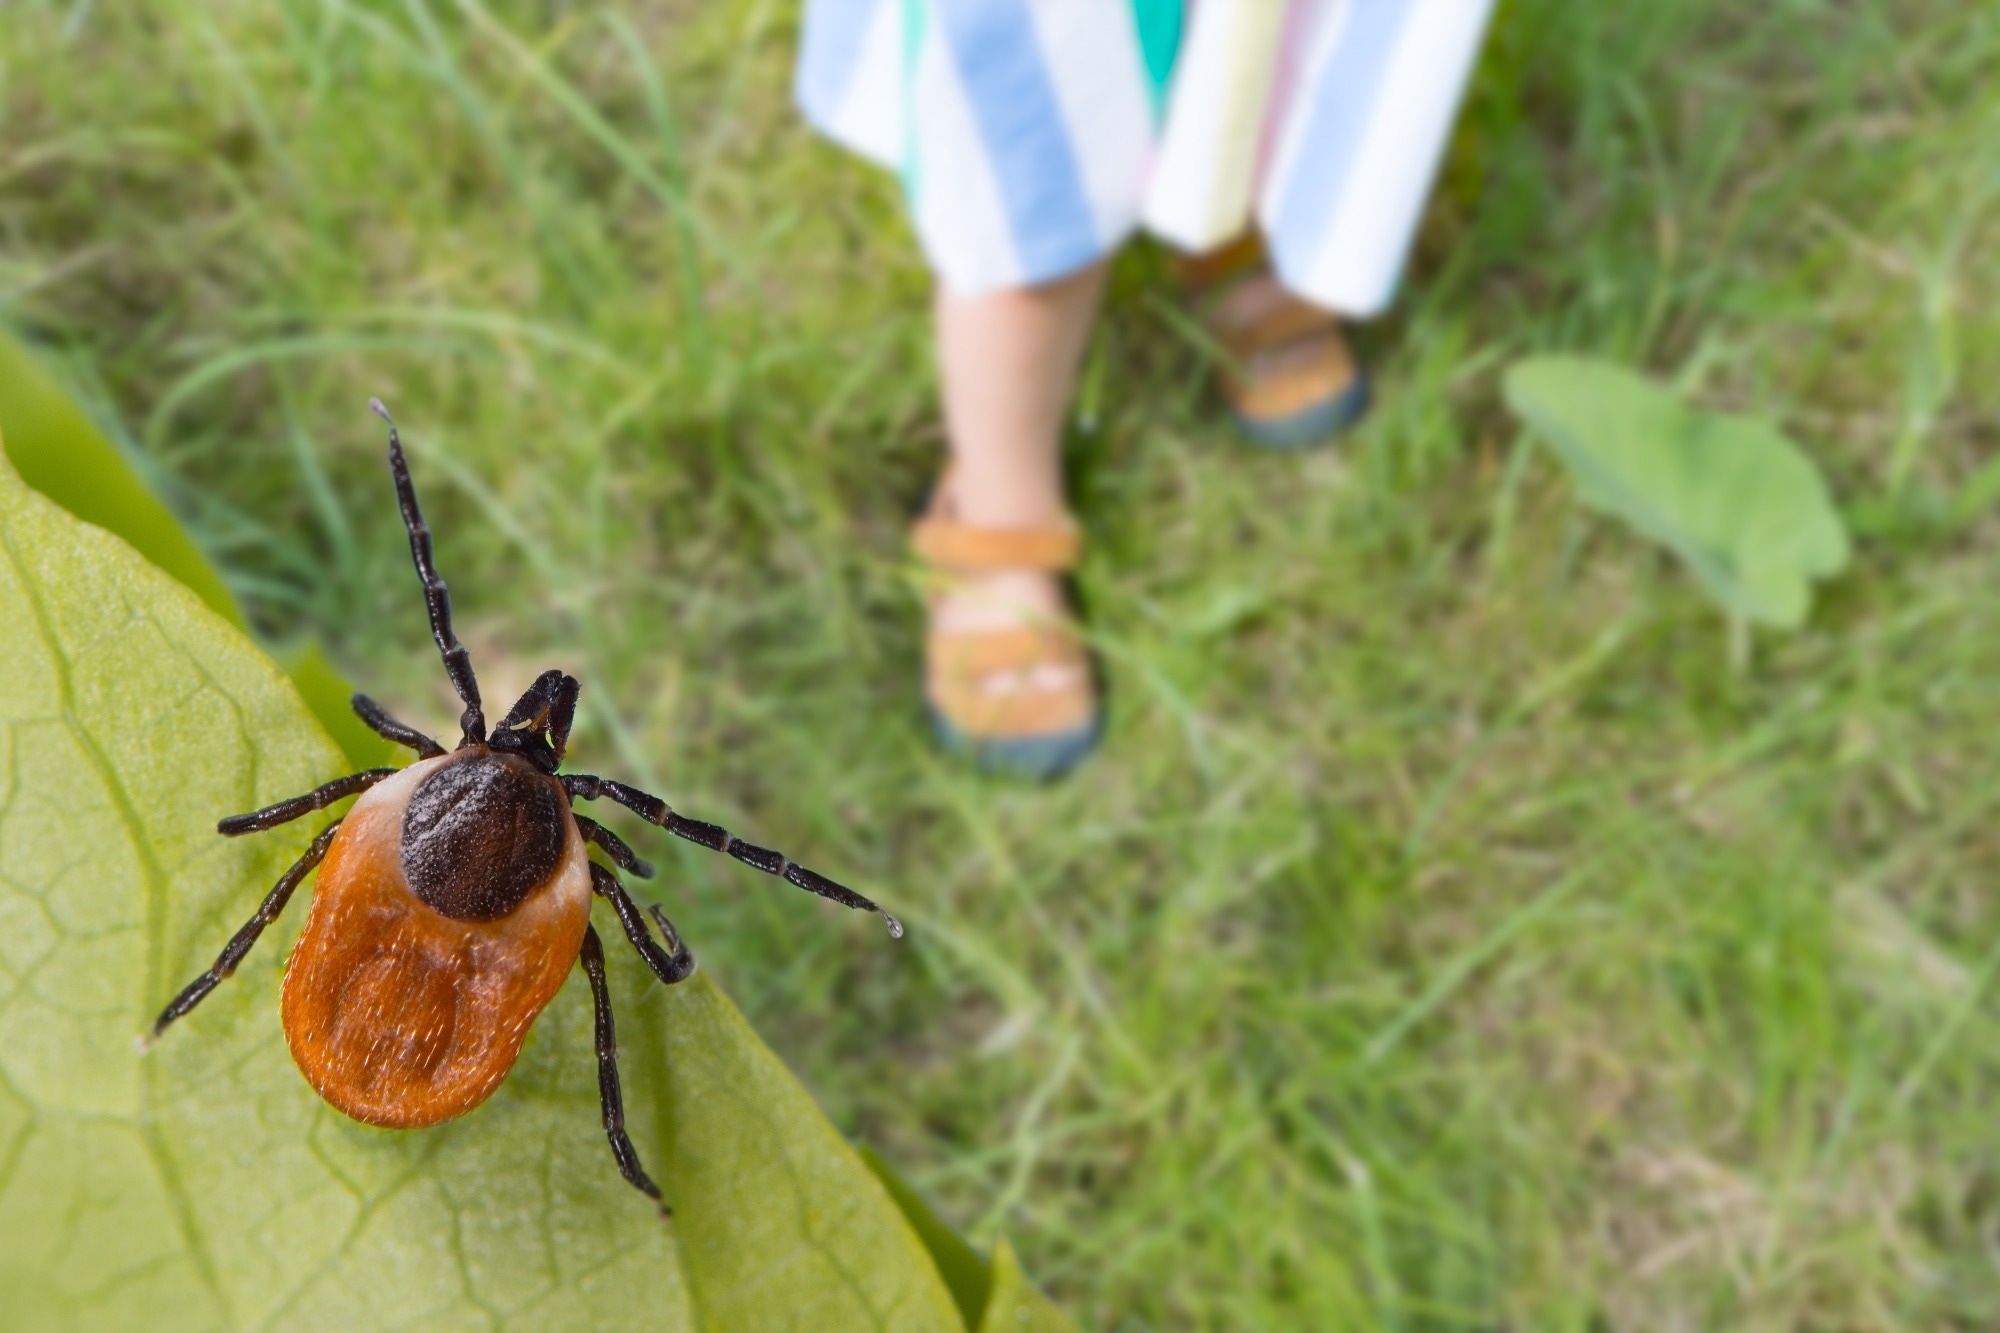 Study: The expanding range of emerging tick-borne viruses in Eastern Europe and the Black Sea Region. Image Credit: KPixMining/Shutterstock.com